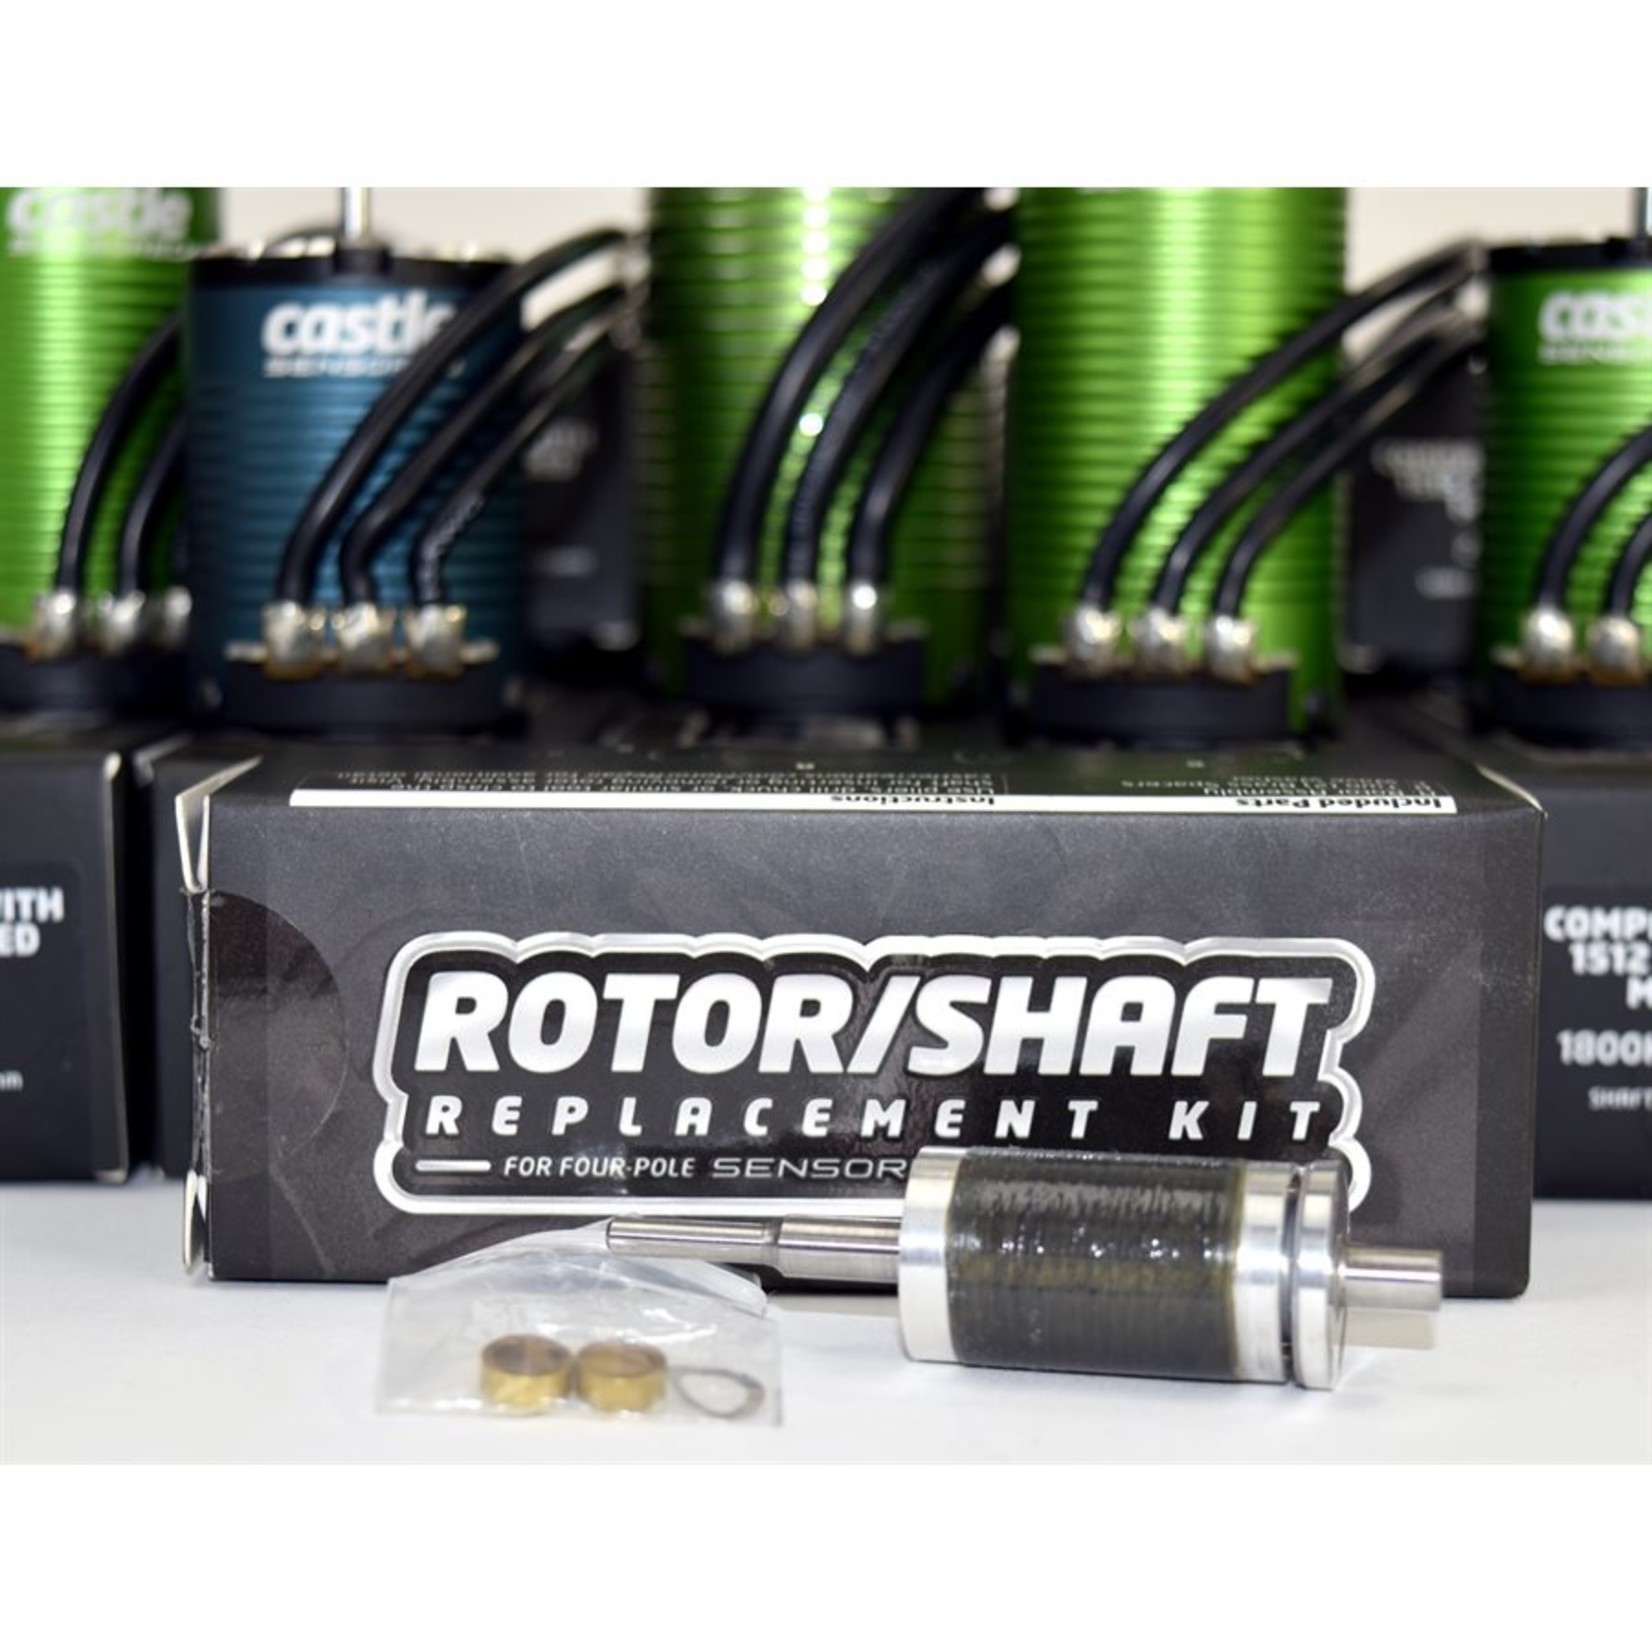 Castle Creations Rotor/Shaft Replacement Kit 1406-7700Kv